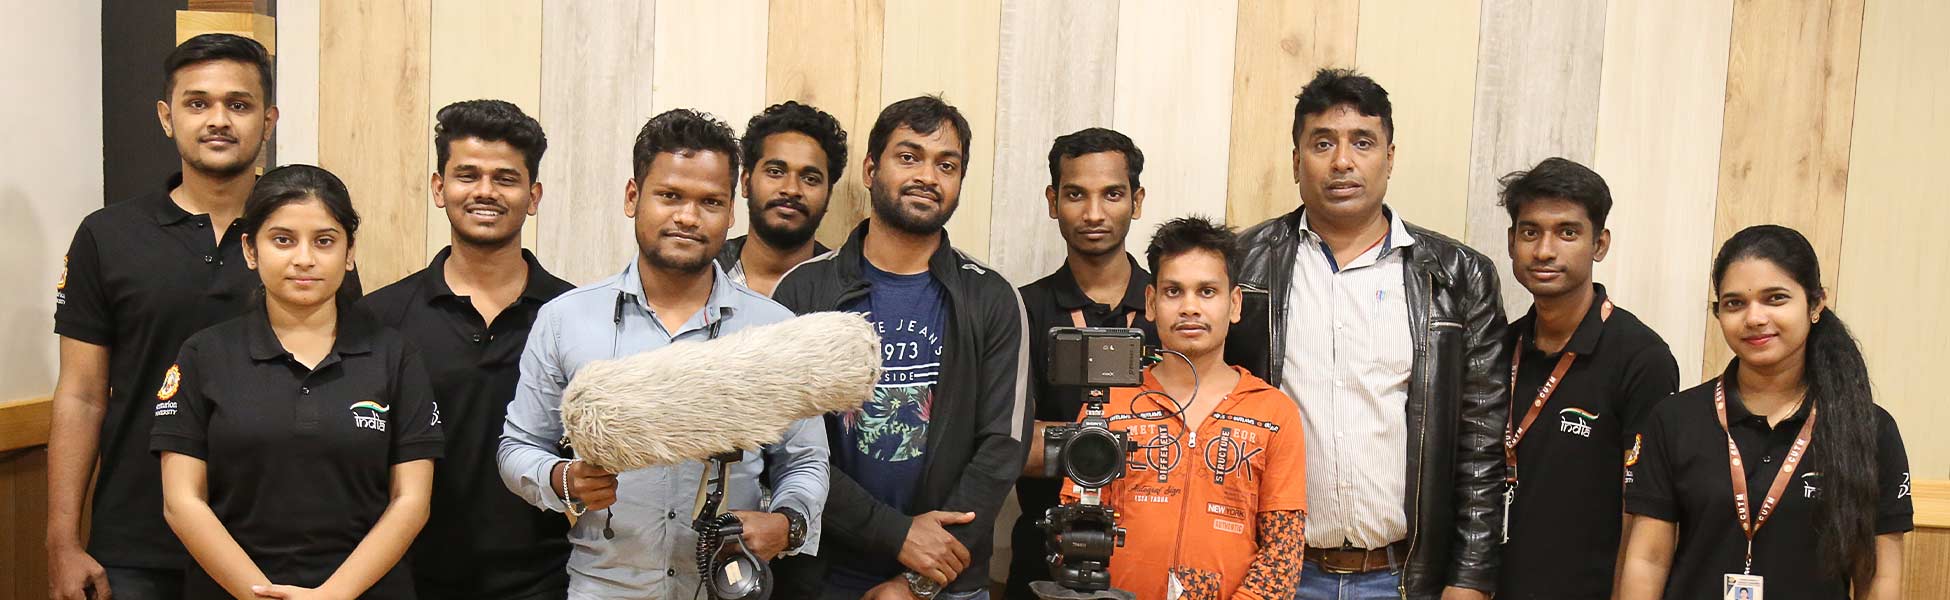 film consultancy services in india, video consultancy services in india, tv consultancy services in india, consultancy services in india